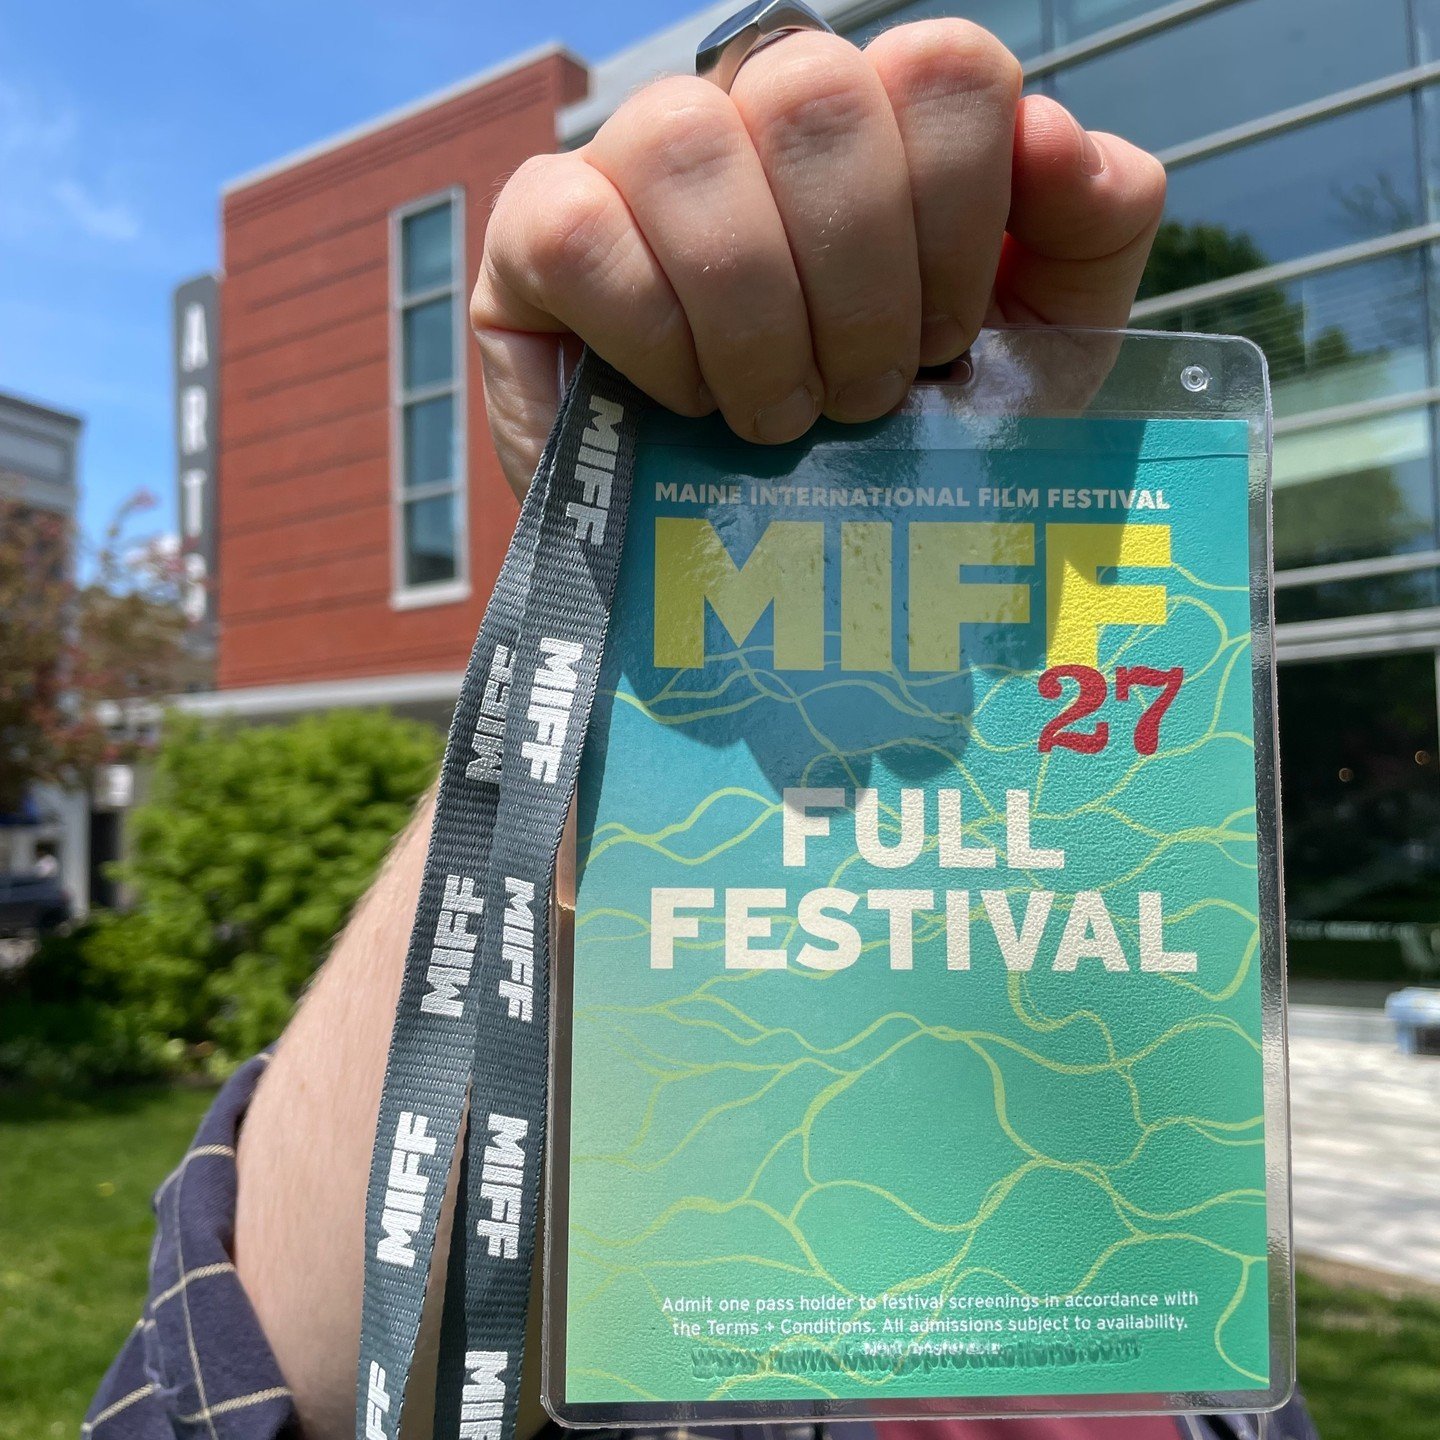 Time is running out to get your pass or package to #MIFF27!

With a pass or package you will receive, amongst other perks and benefits, a week of priority ticket reservations when the full festival program is announced!

Don&rsquo;t miss out on secur